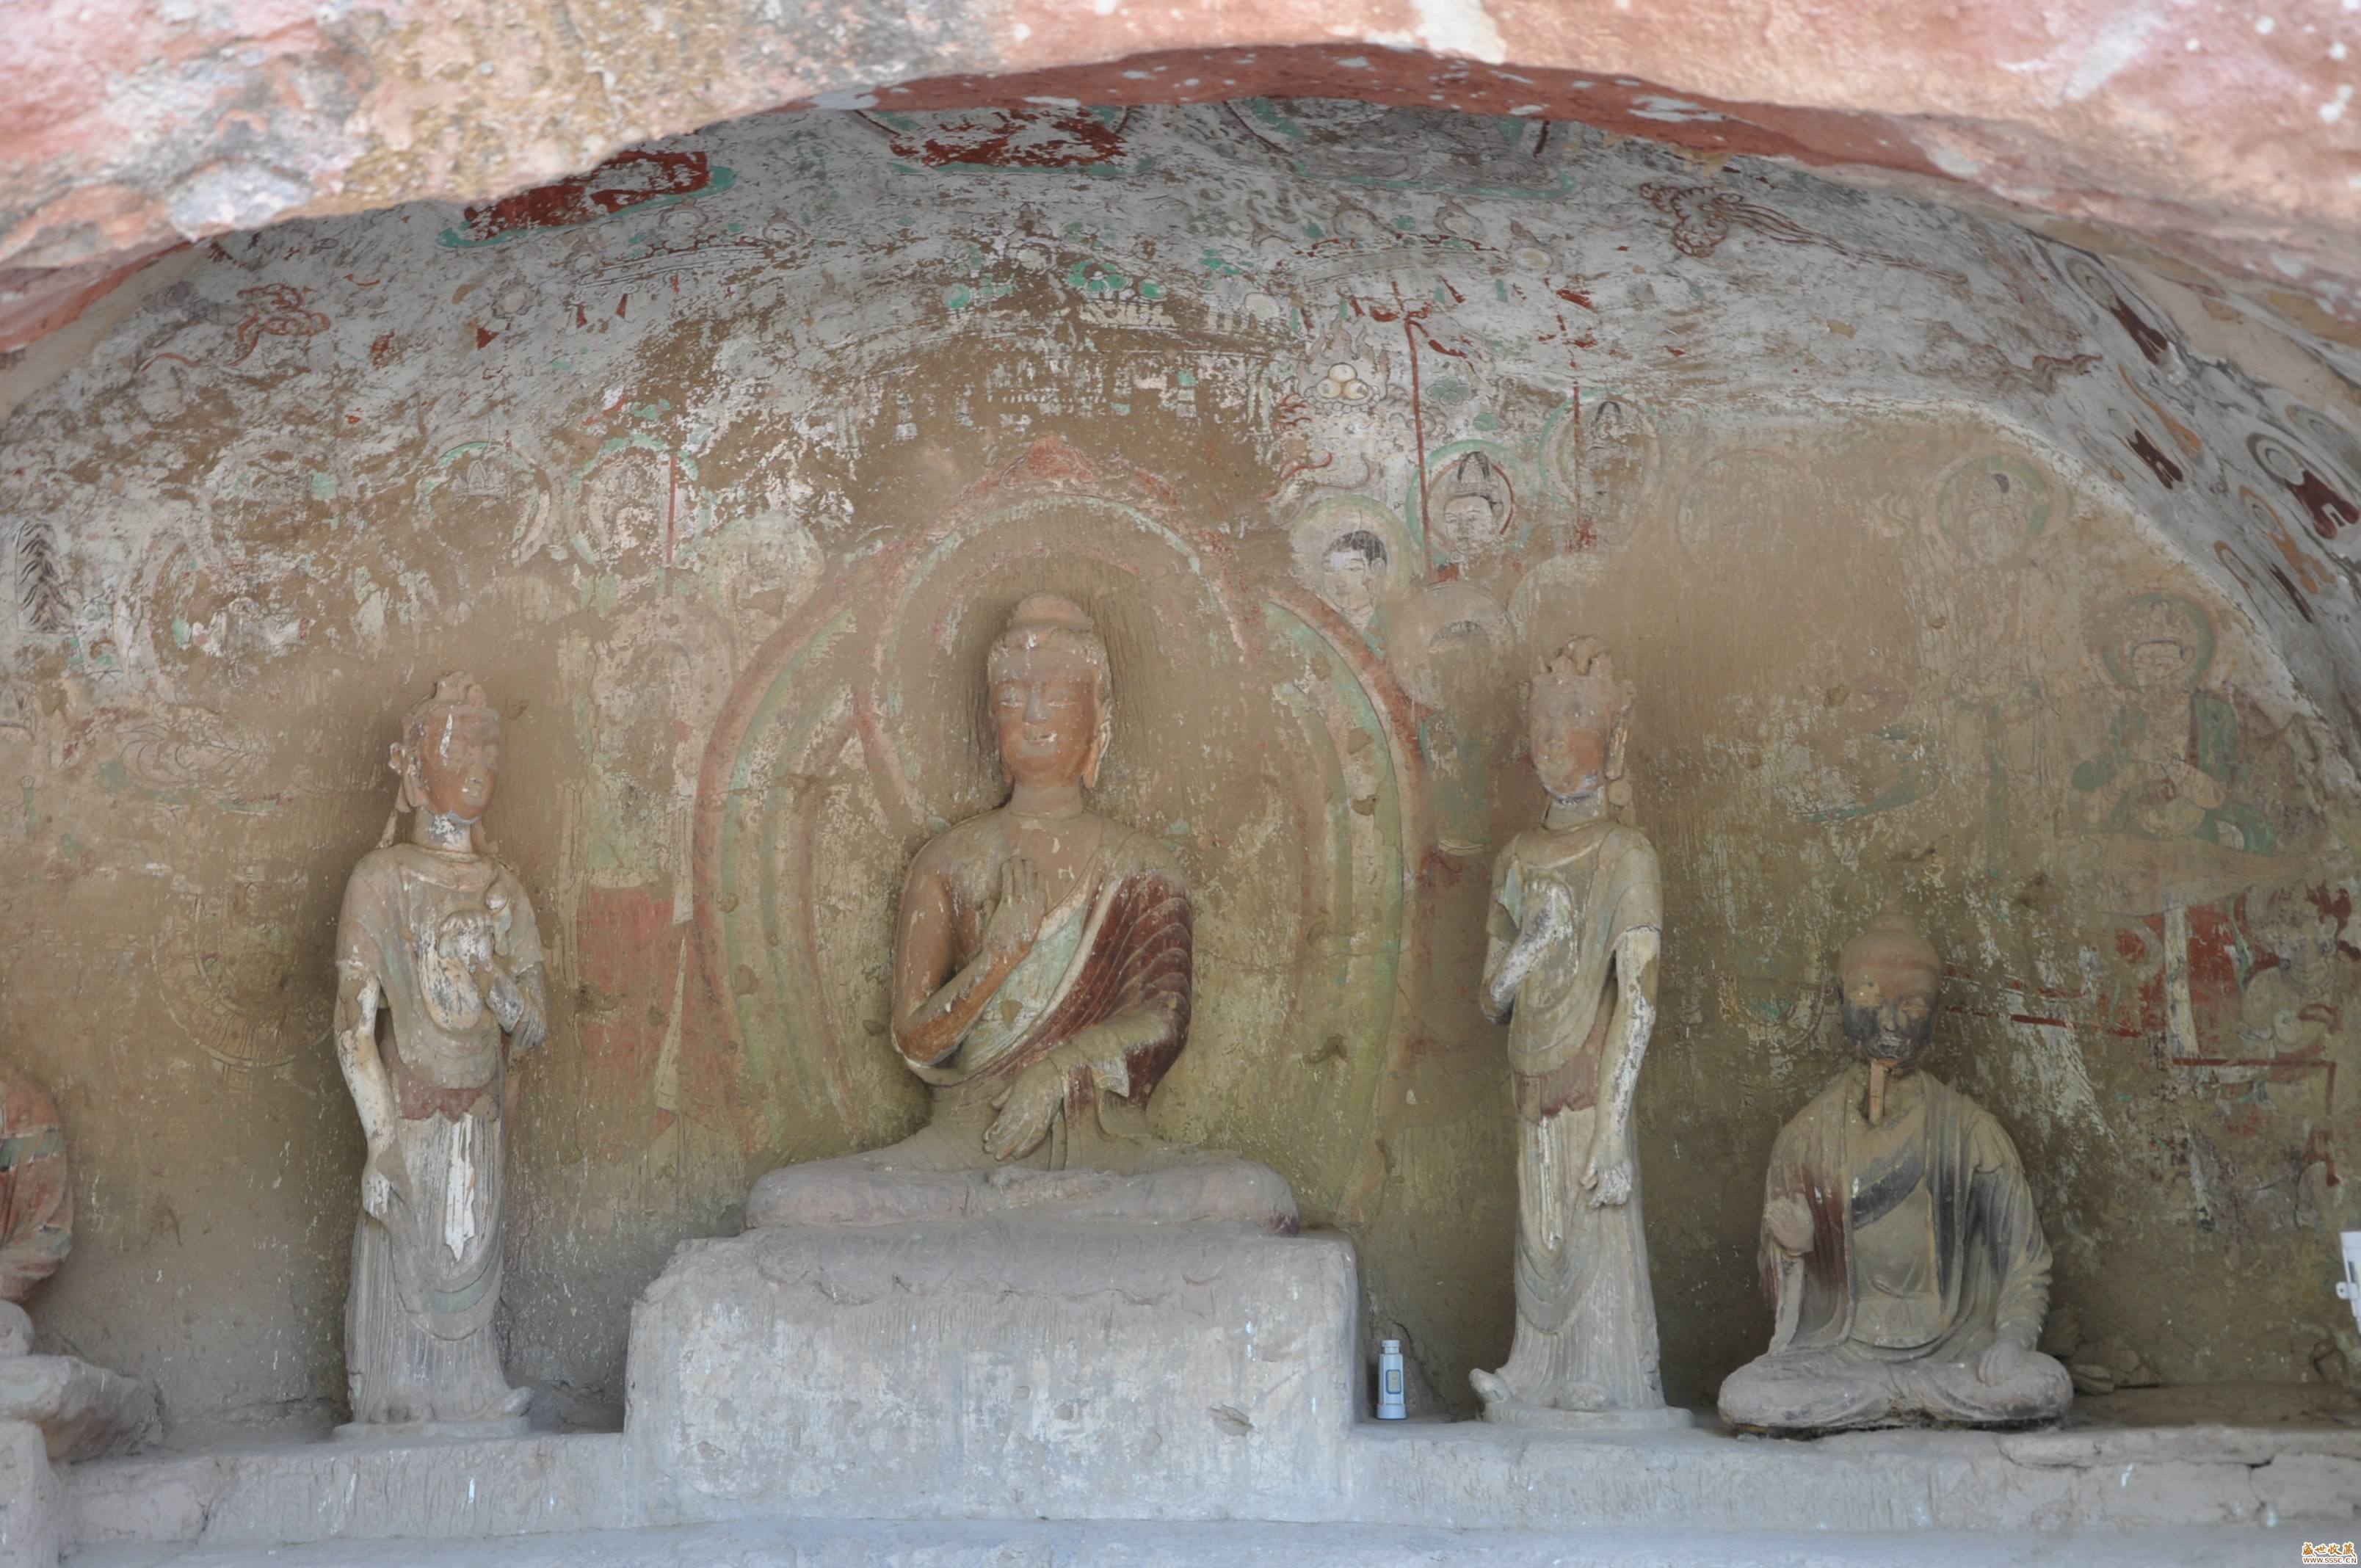 The Bingling Temple Grottoes